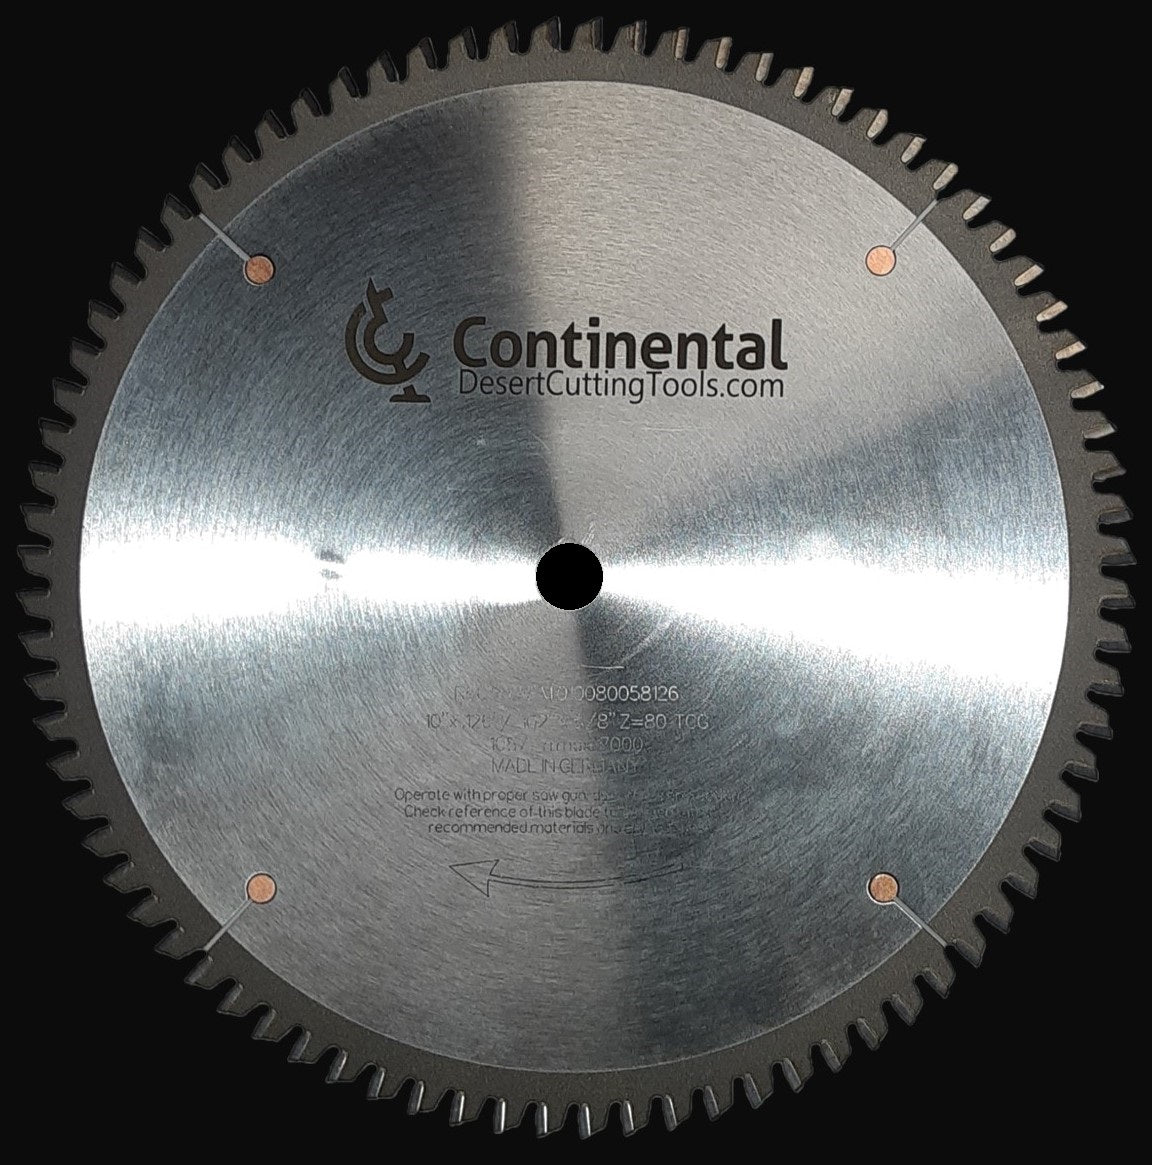 C-1080A Continental Saw Blade 10"x80 tooth 5/8" bore Alternate Top Bevel